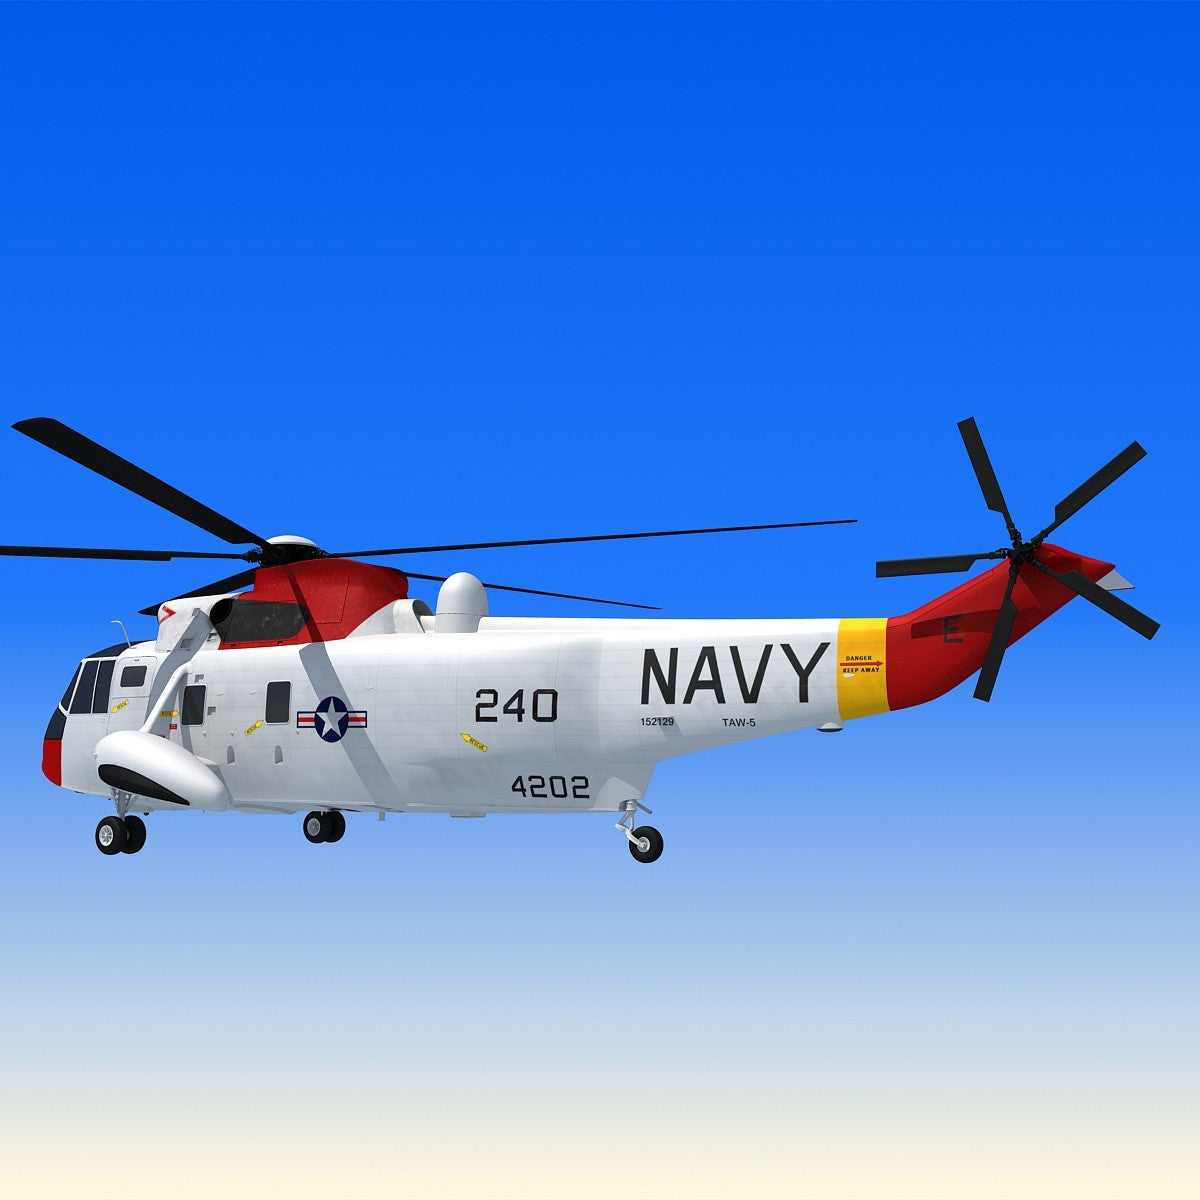 3D Helicopter Sikorsky SH-3 Sea King